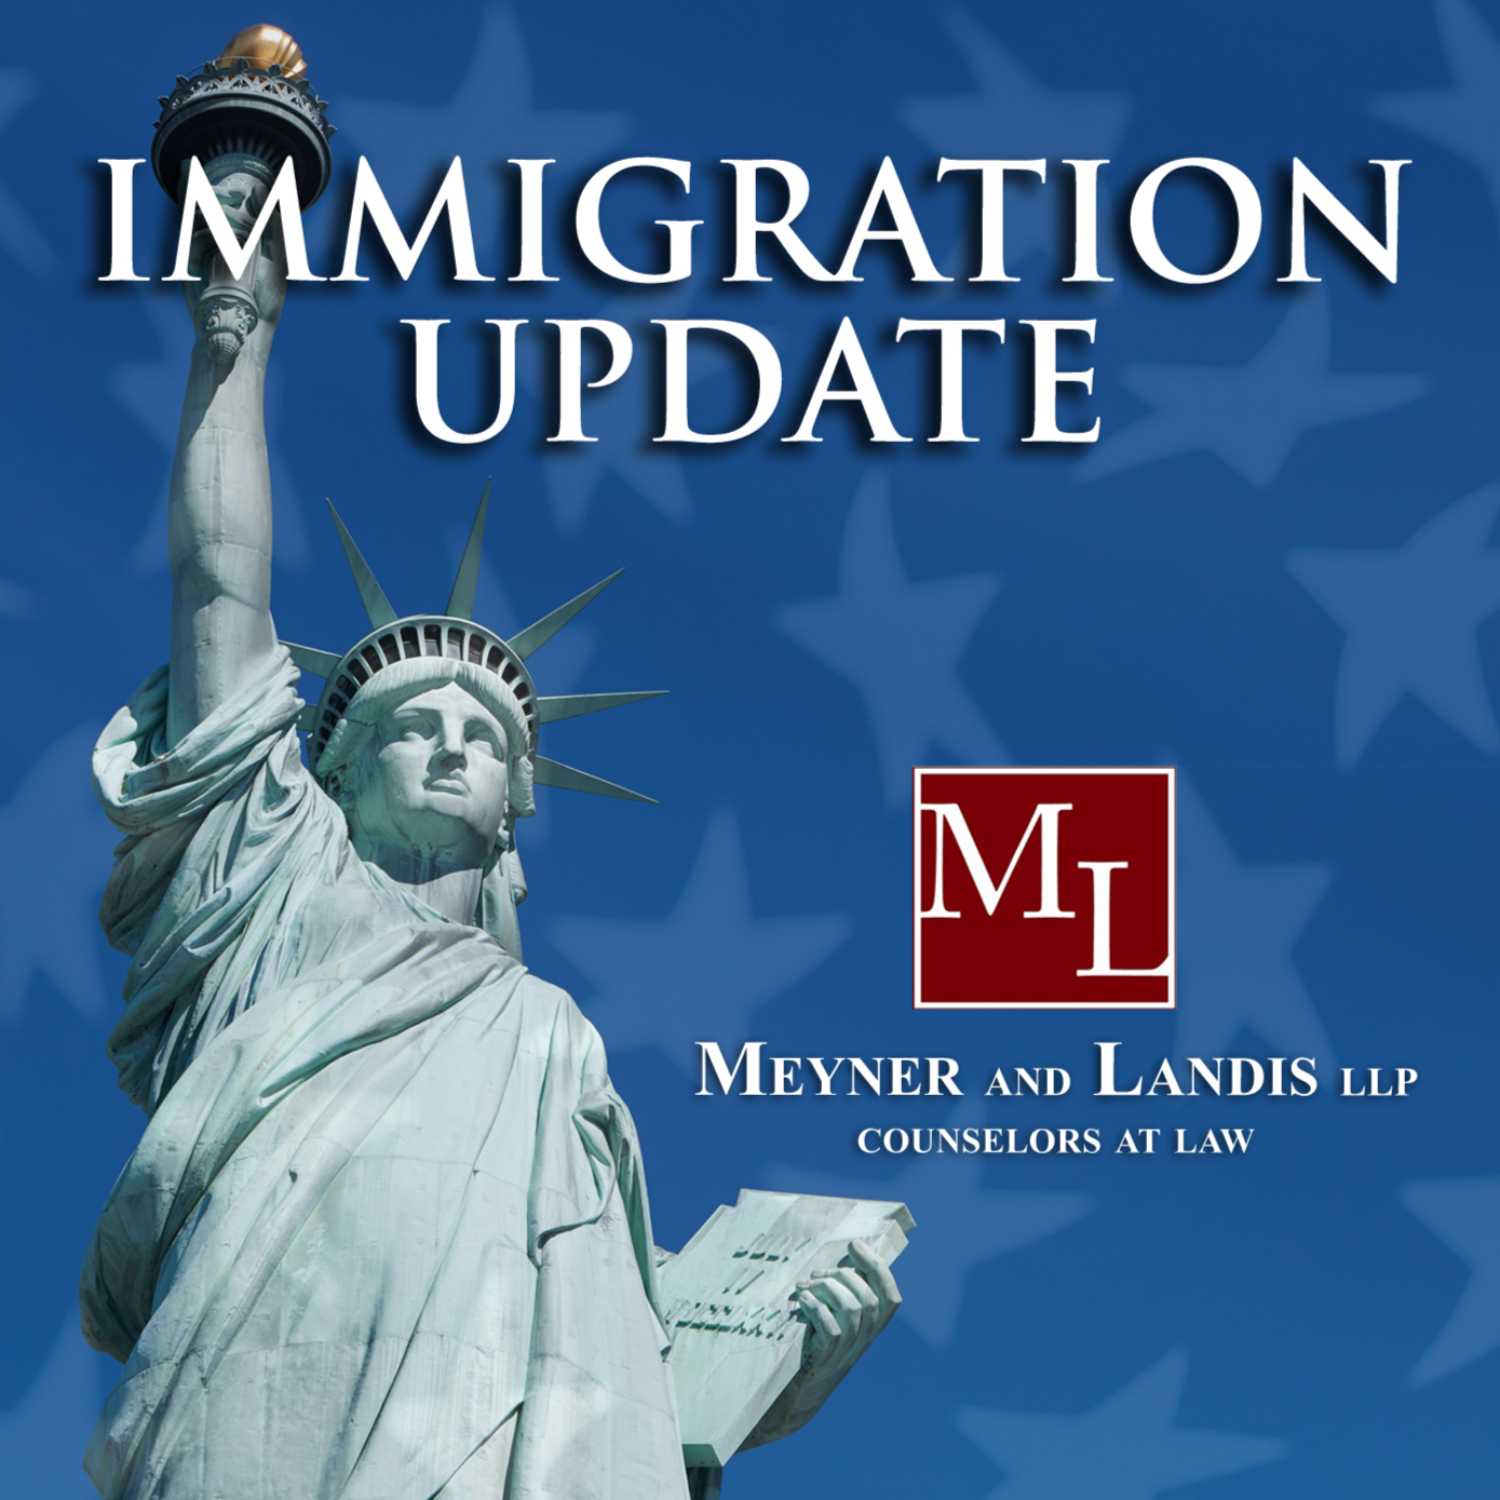 Recent Policy Changes Impacting Form I-693, Report of Medical Examination or Vaccination Record